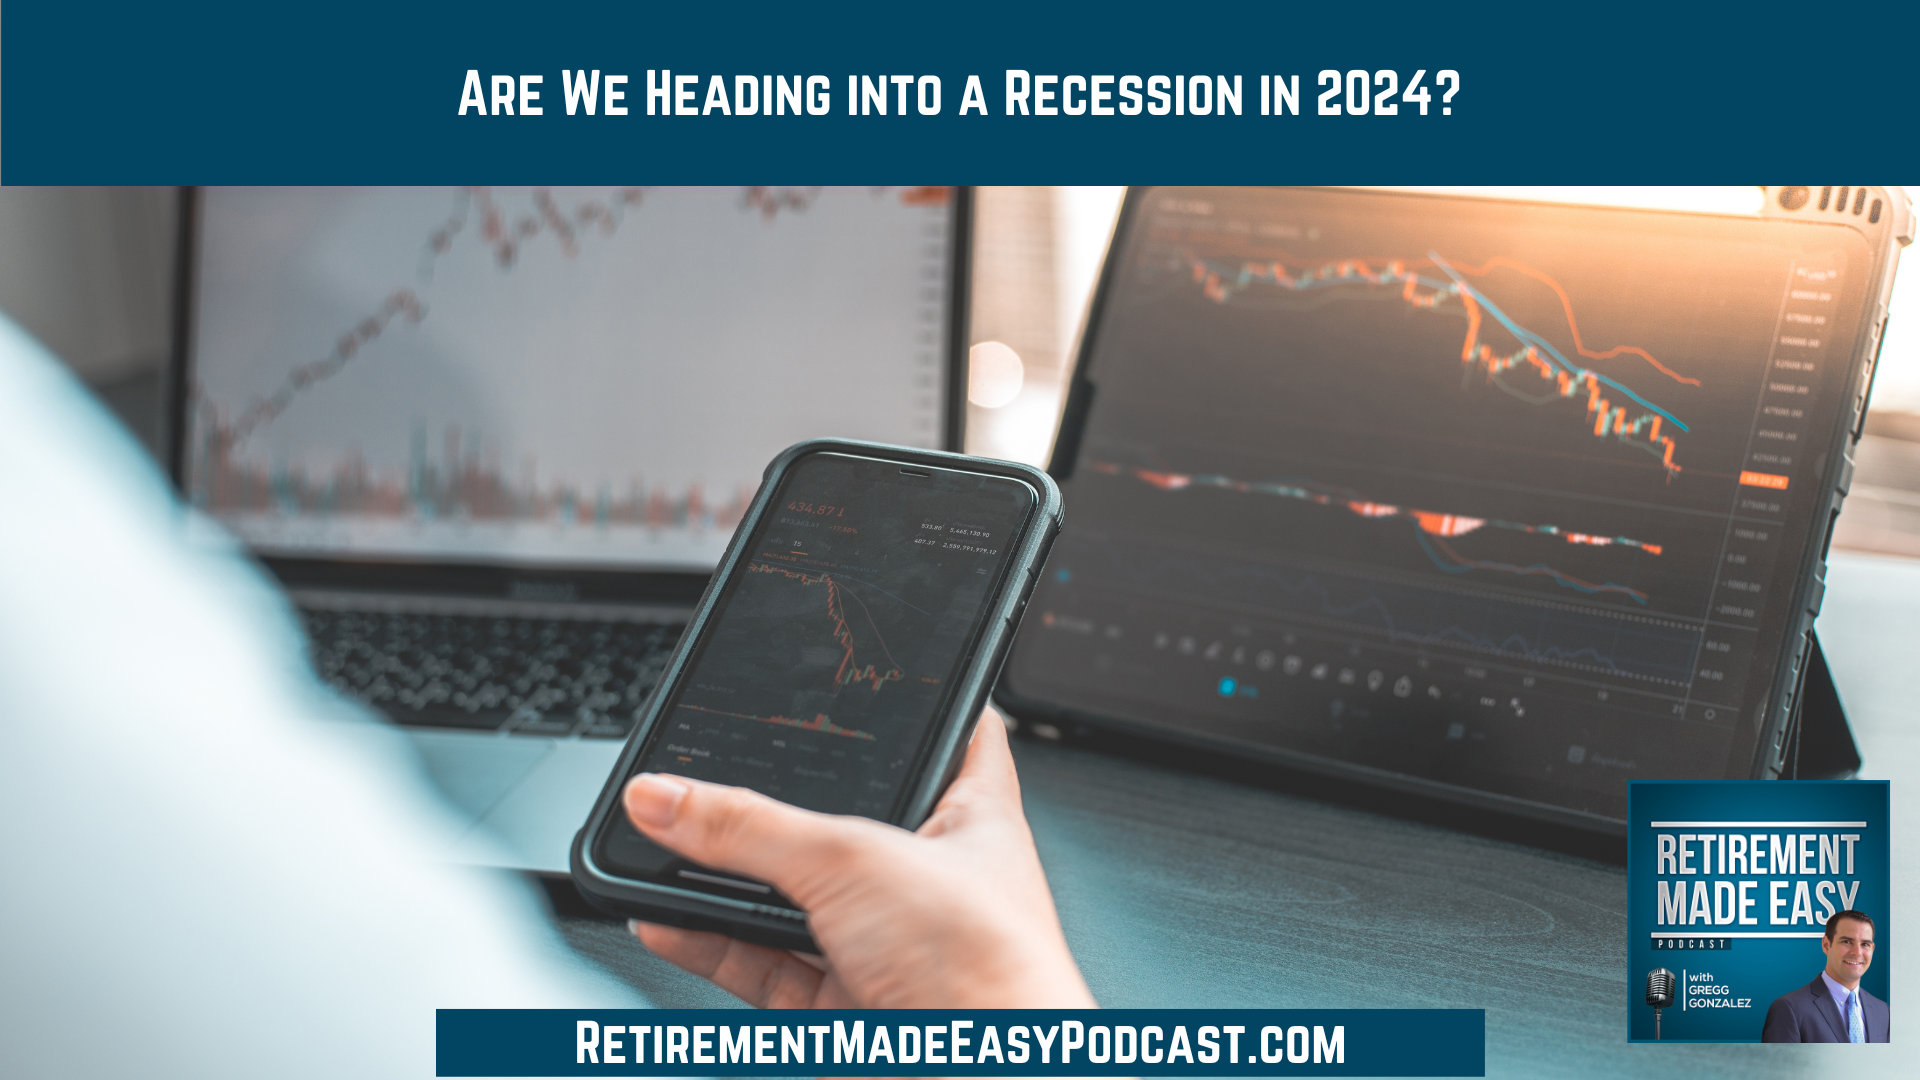 Are We Heading into a Recession in 2024?